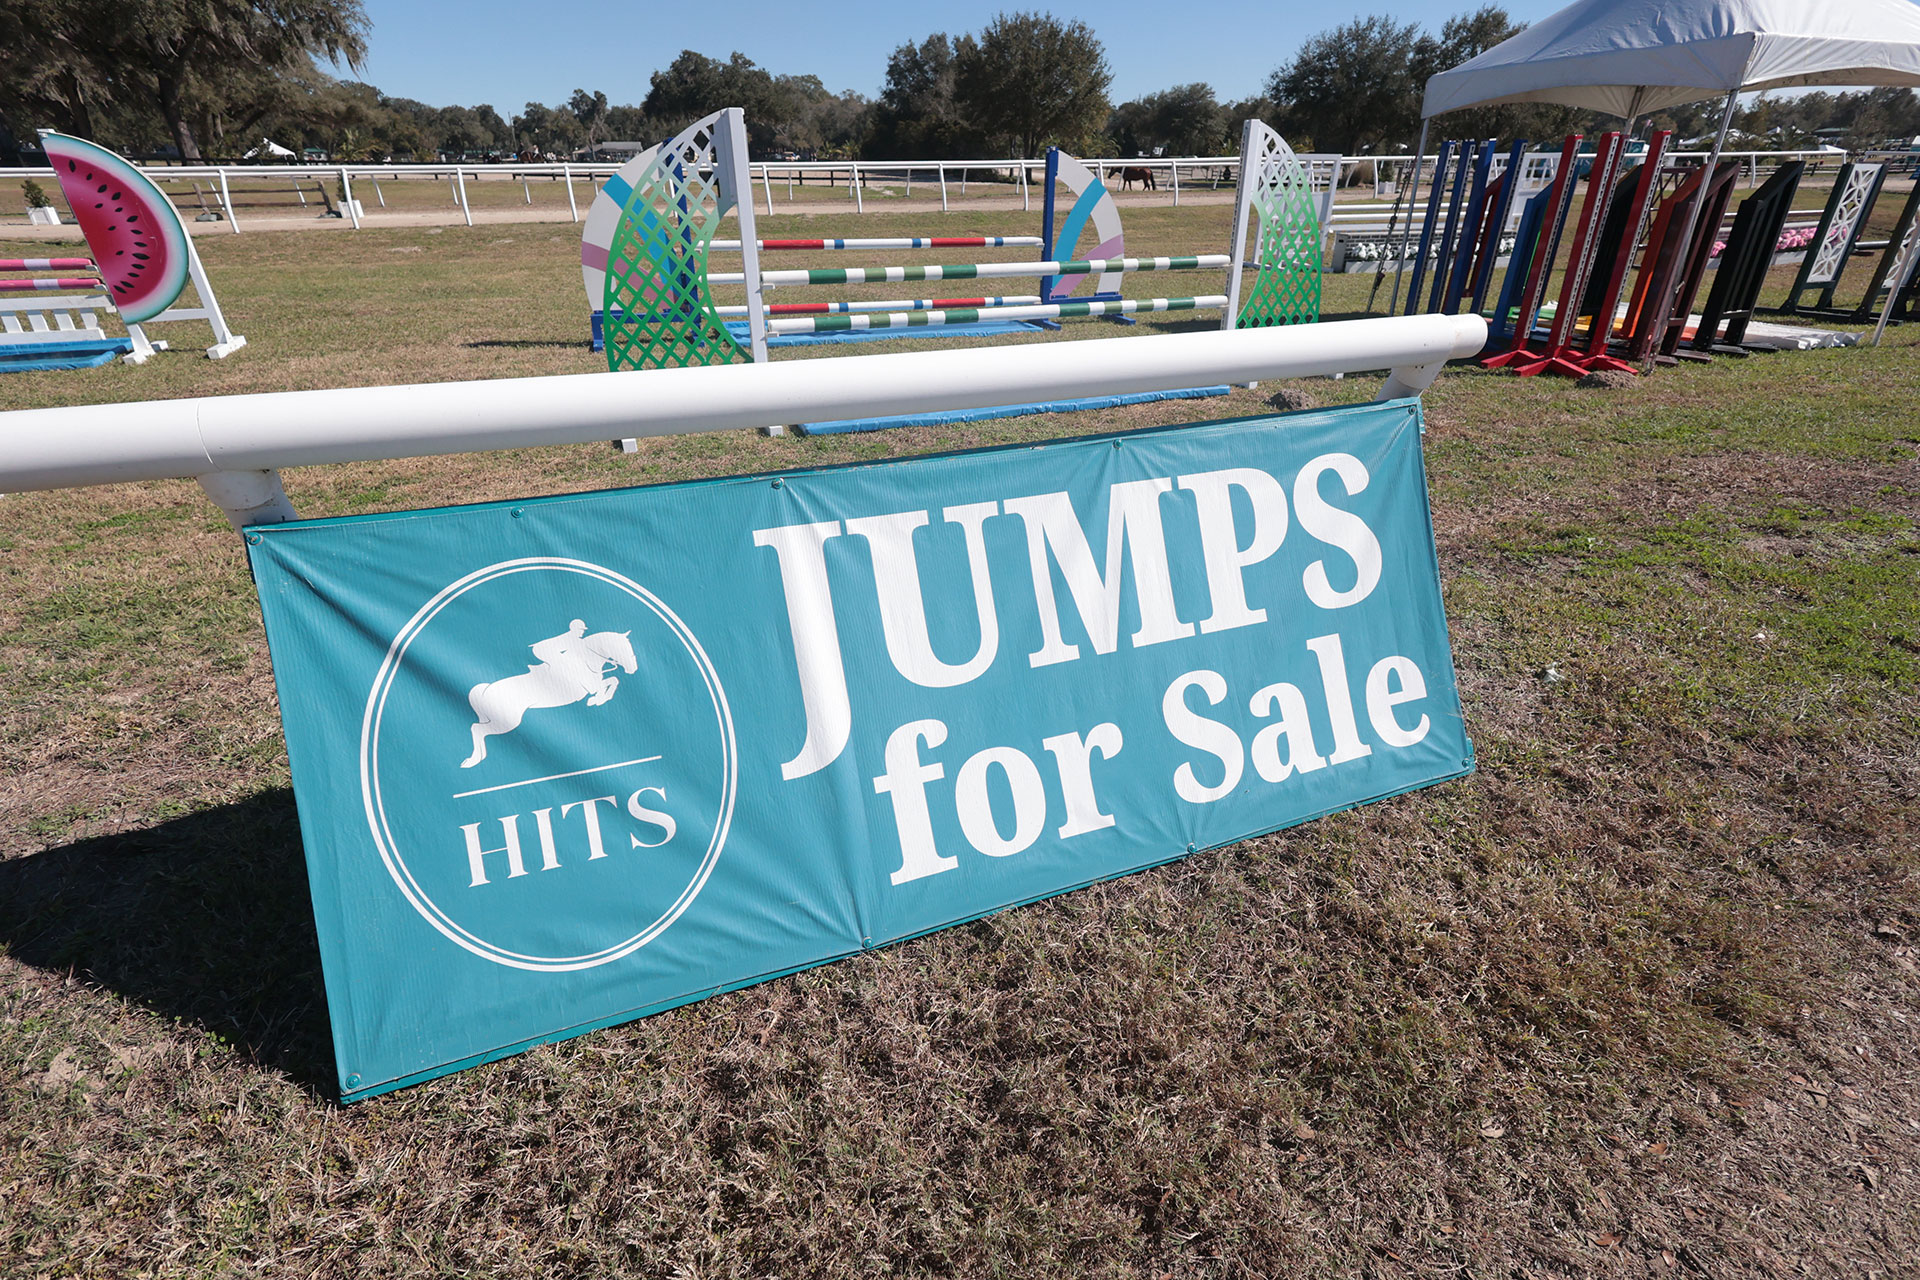 Image of HITS Jumps for sale